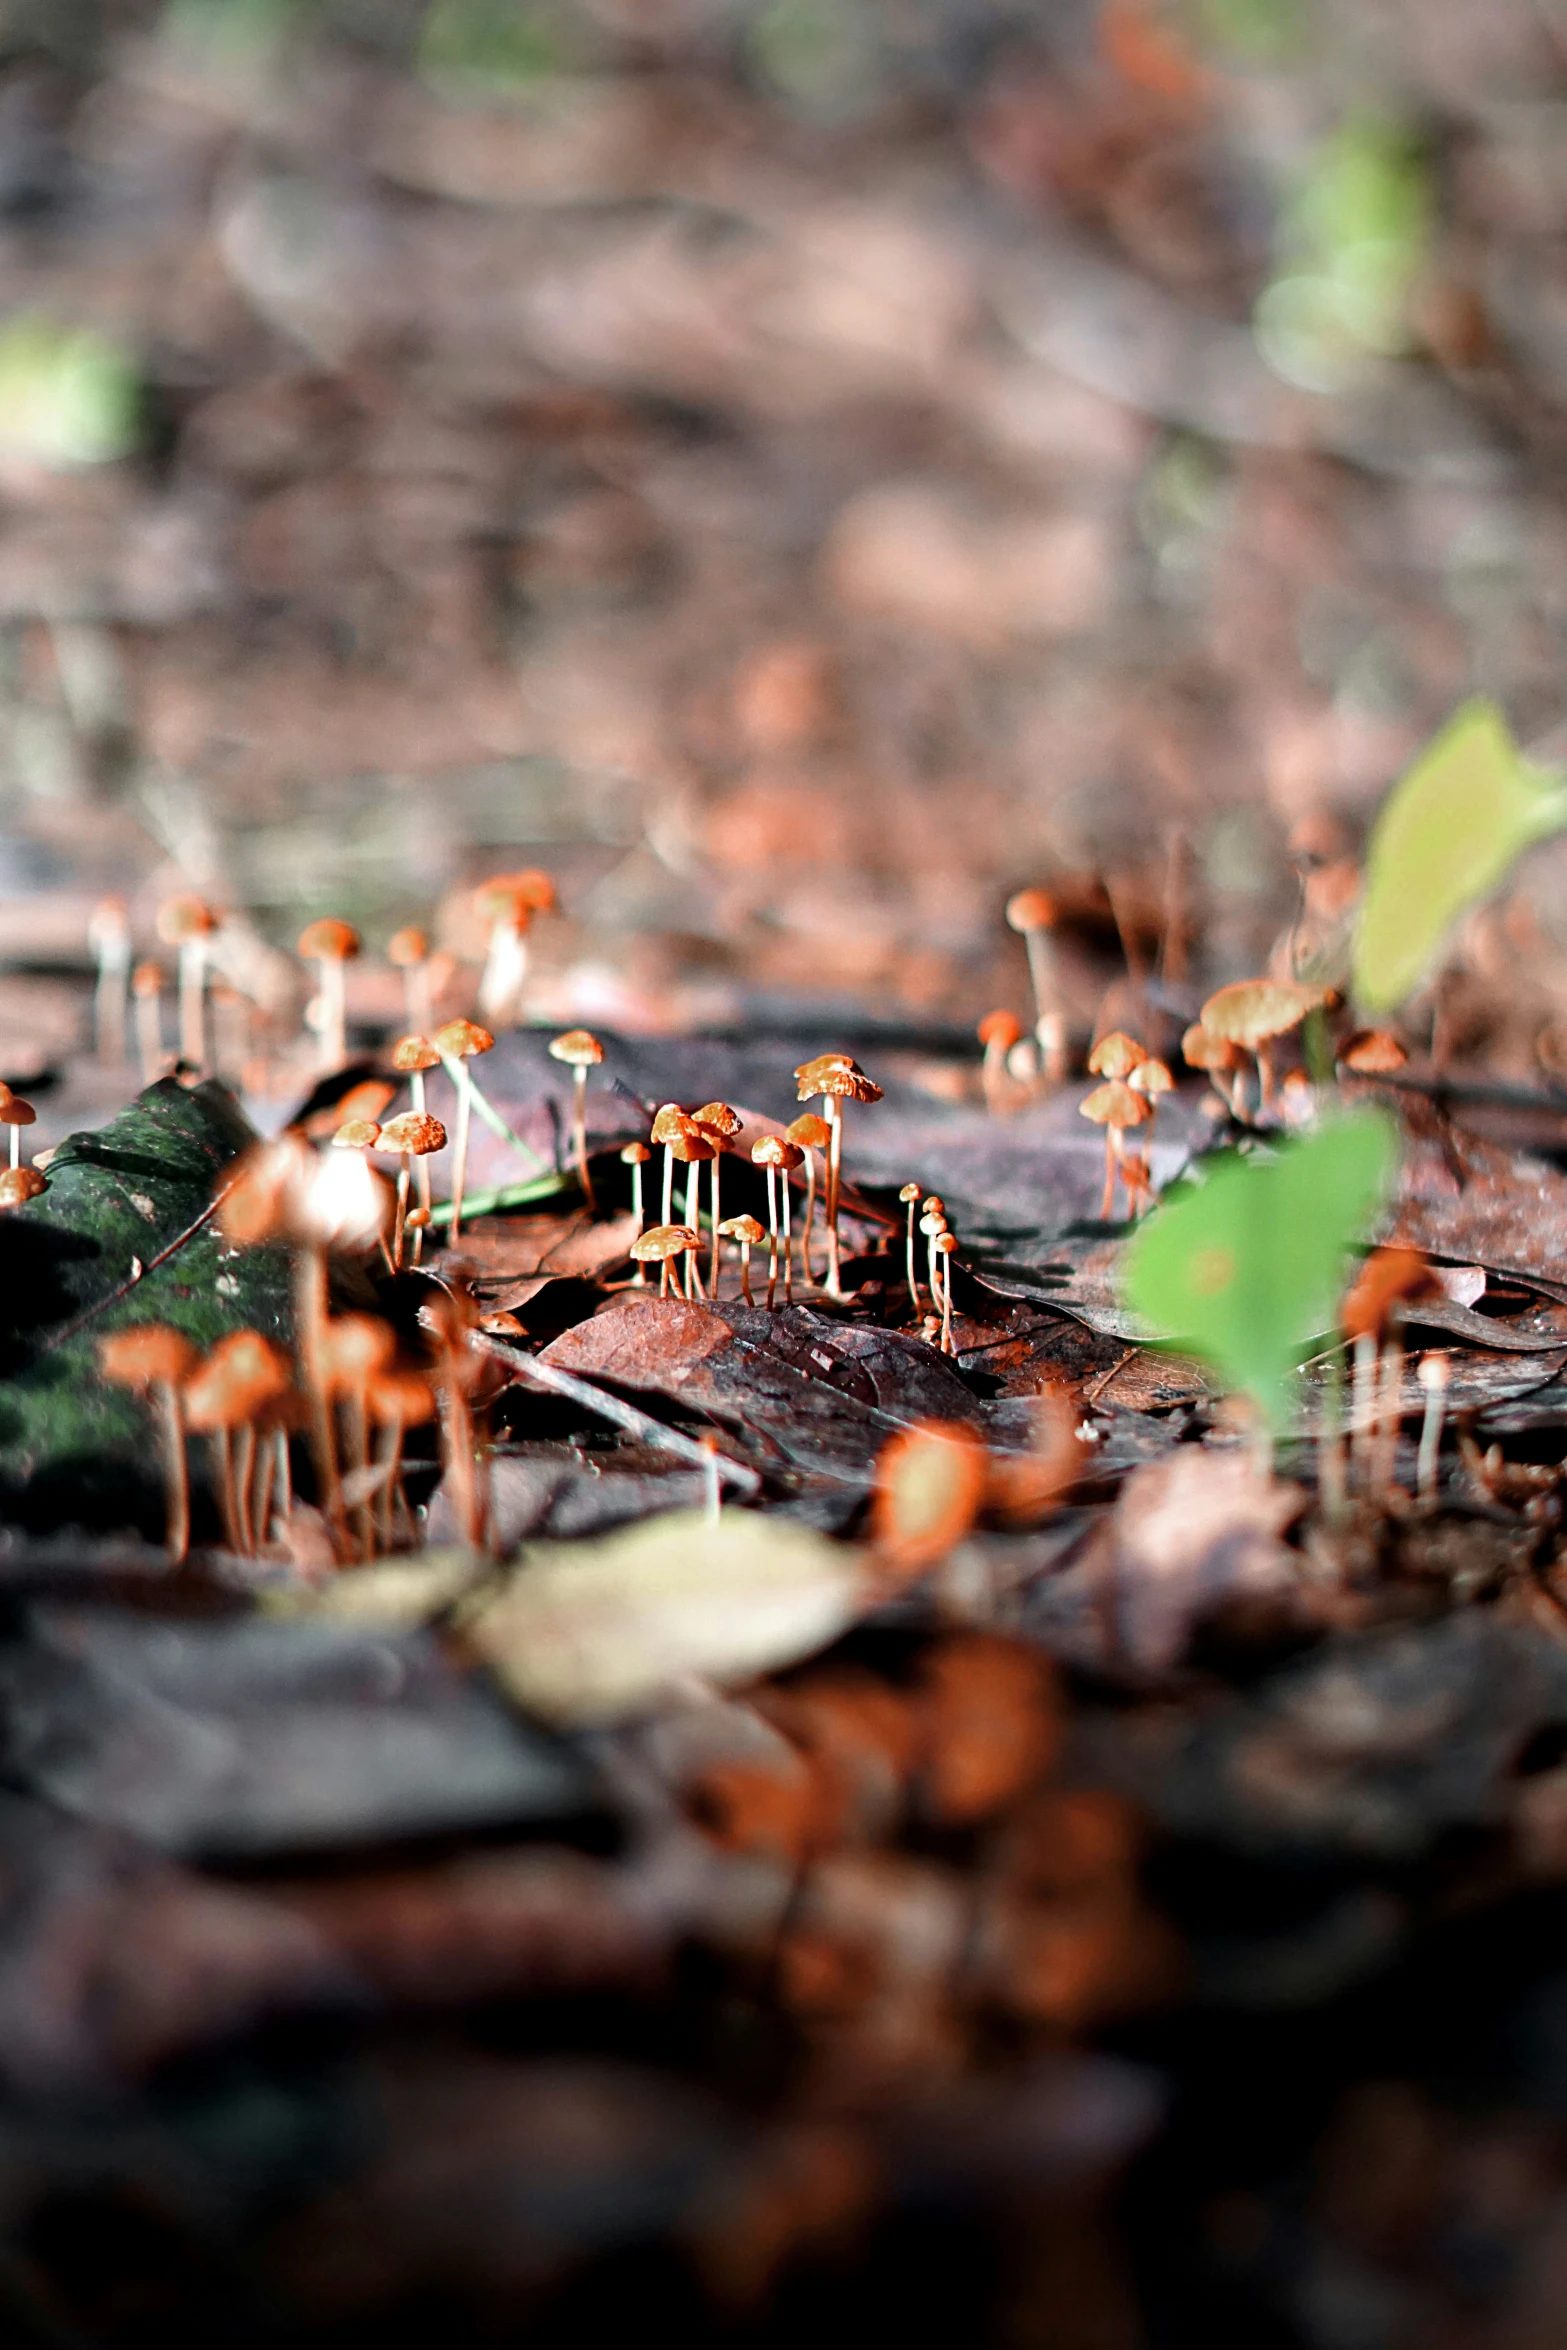 group of small brown mushrooms growing on the ground